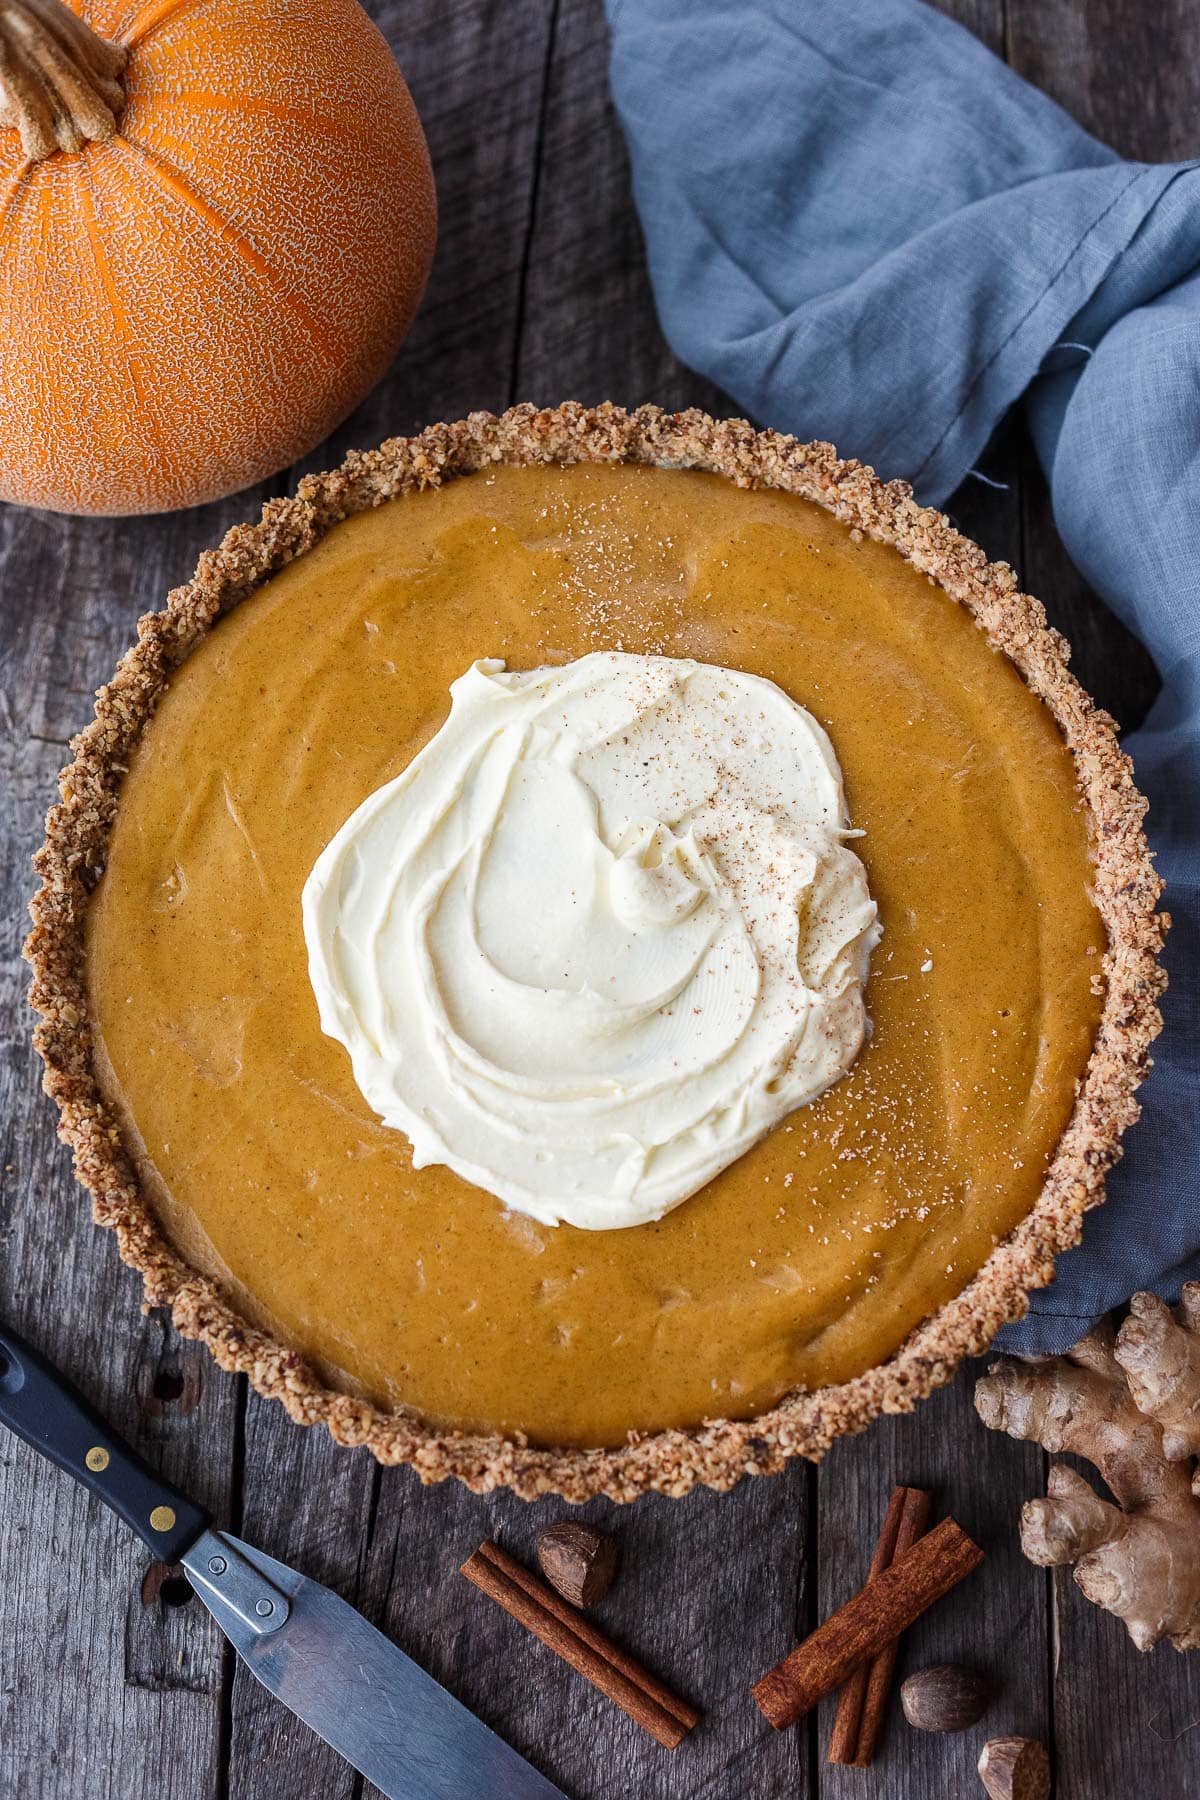 A decadent Vegan Pumpkin Tart with a smooth caramely pumpkin filling in a tender pecan oat crumb crust. Richly spiced, easy to make, and freezes beautifully. Perfect for the holidays!